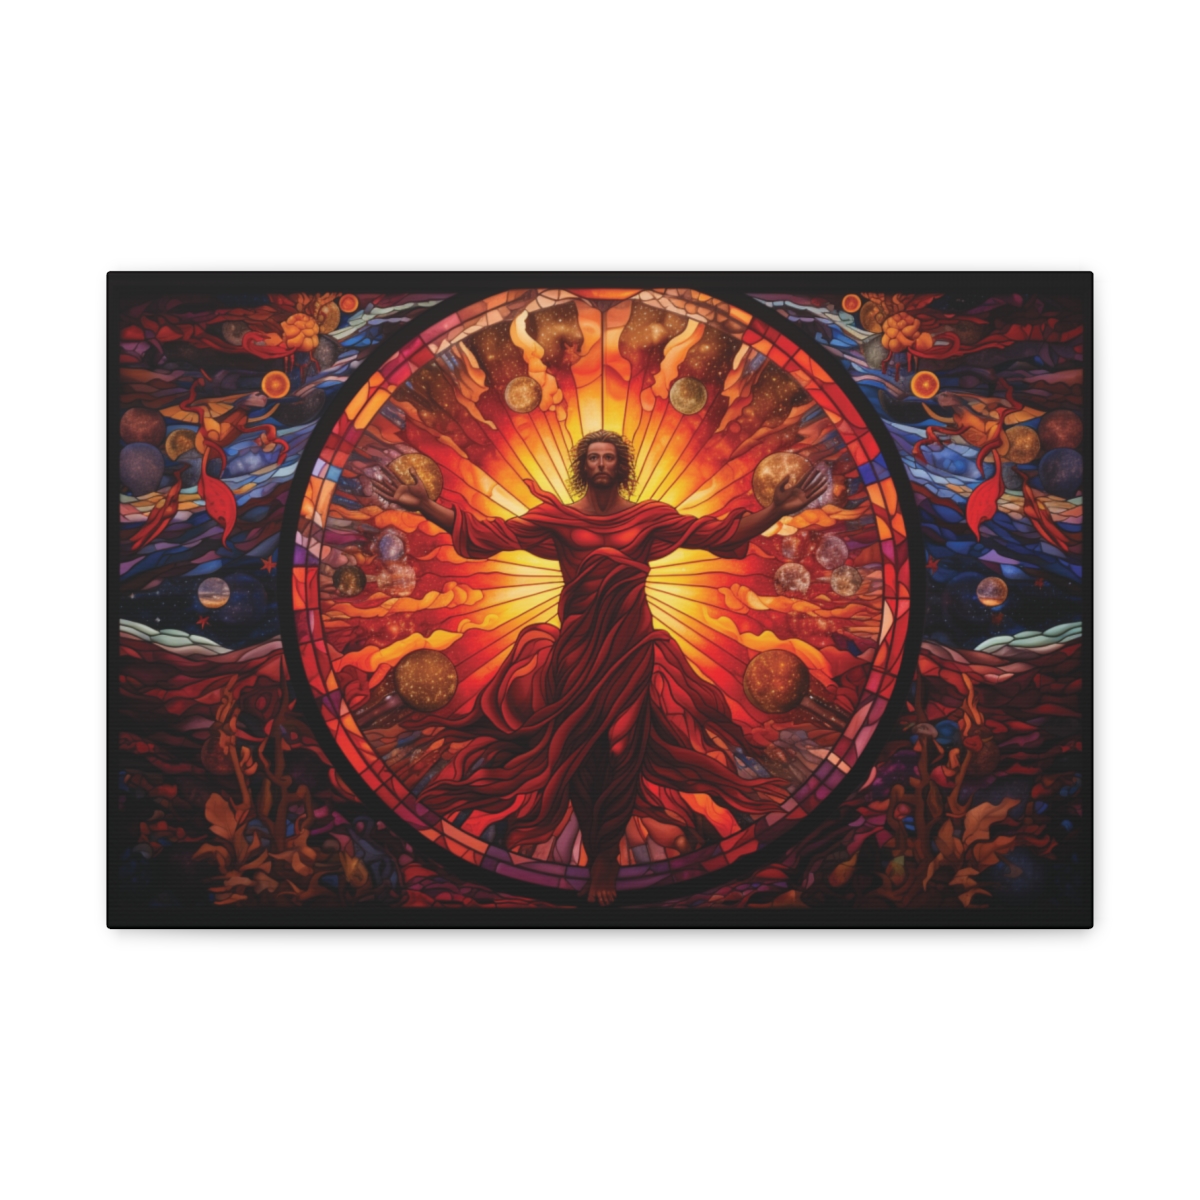 Spiritual Art: The Great Ascension